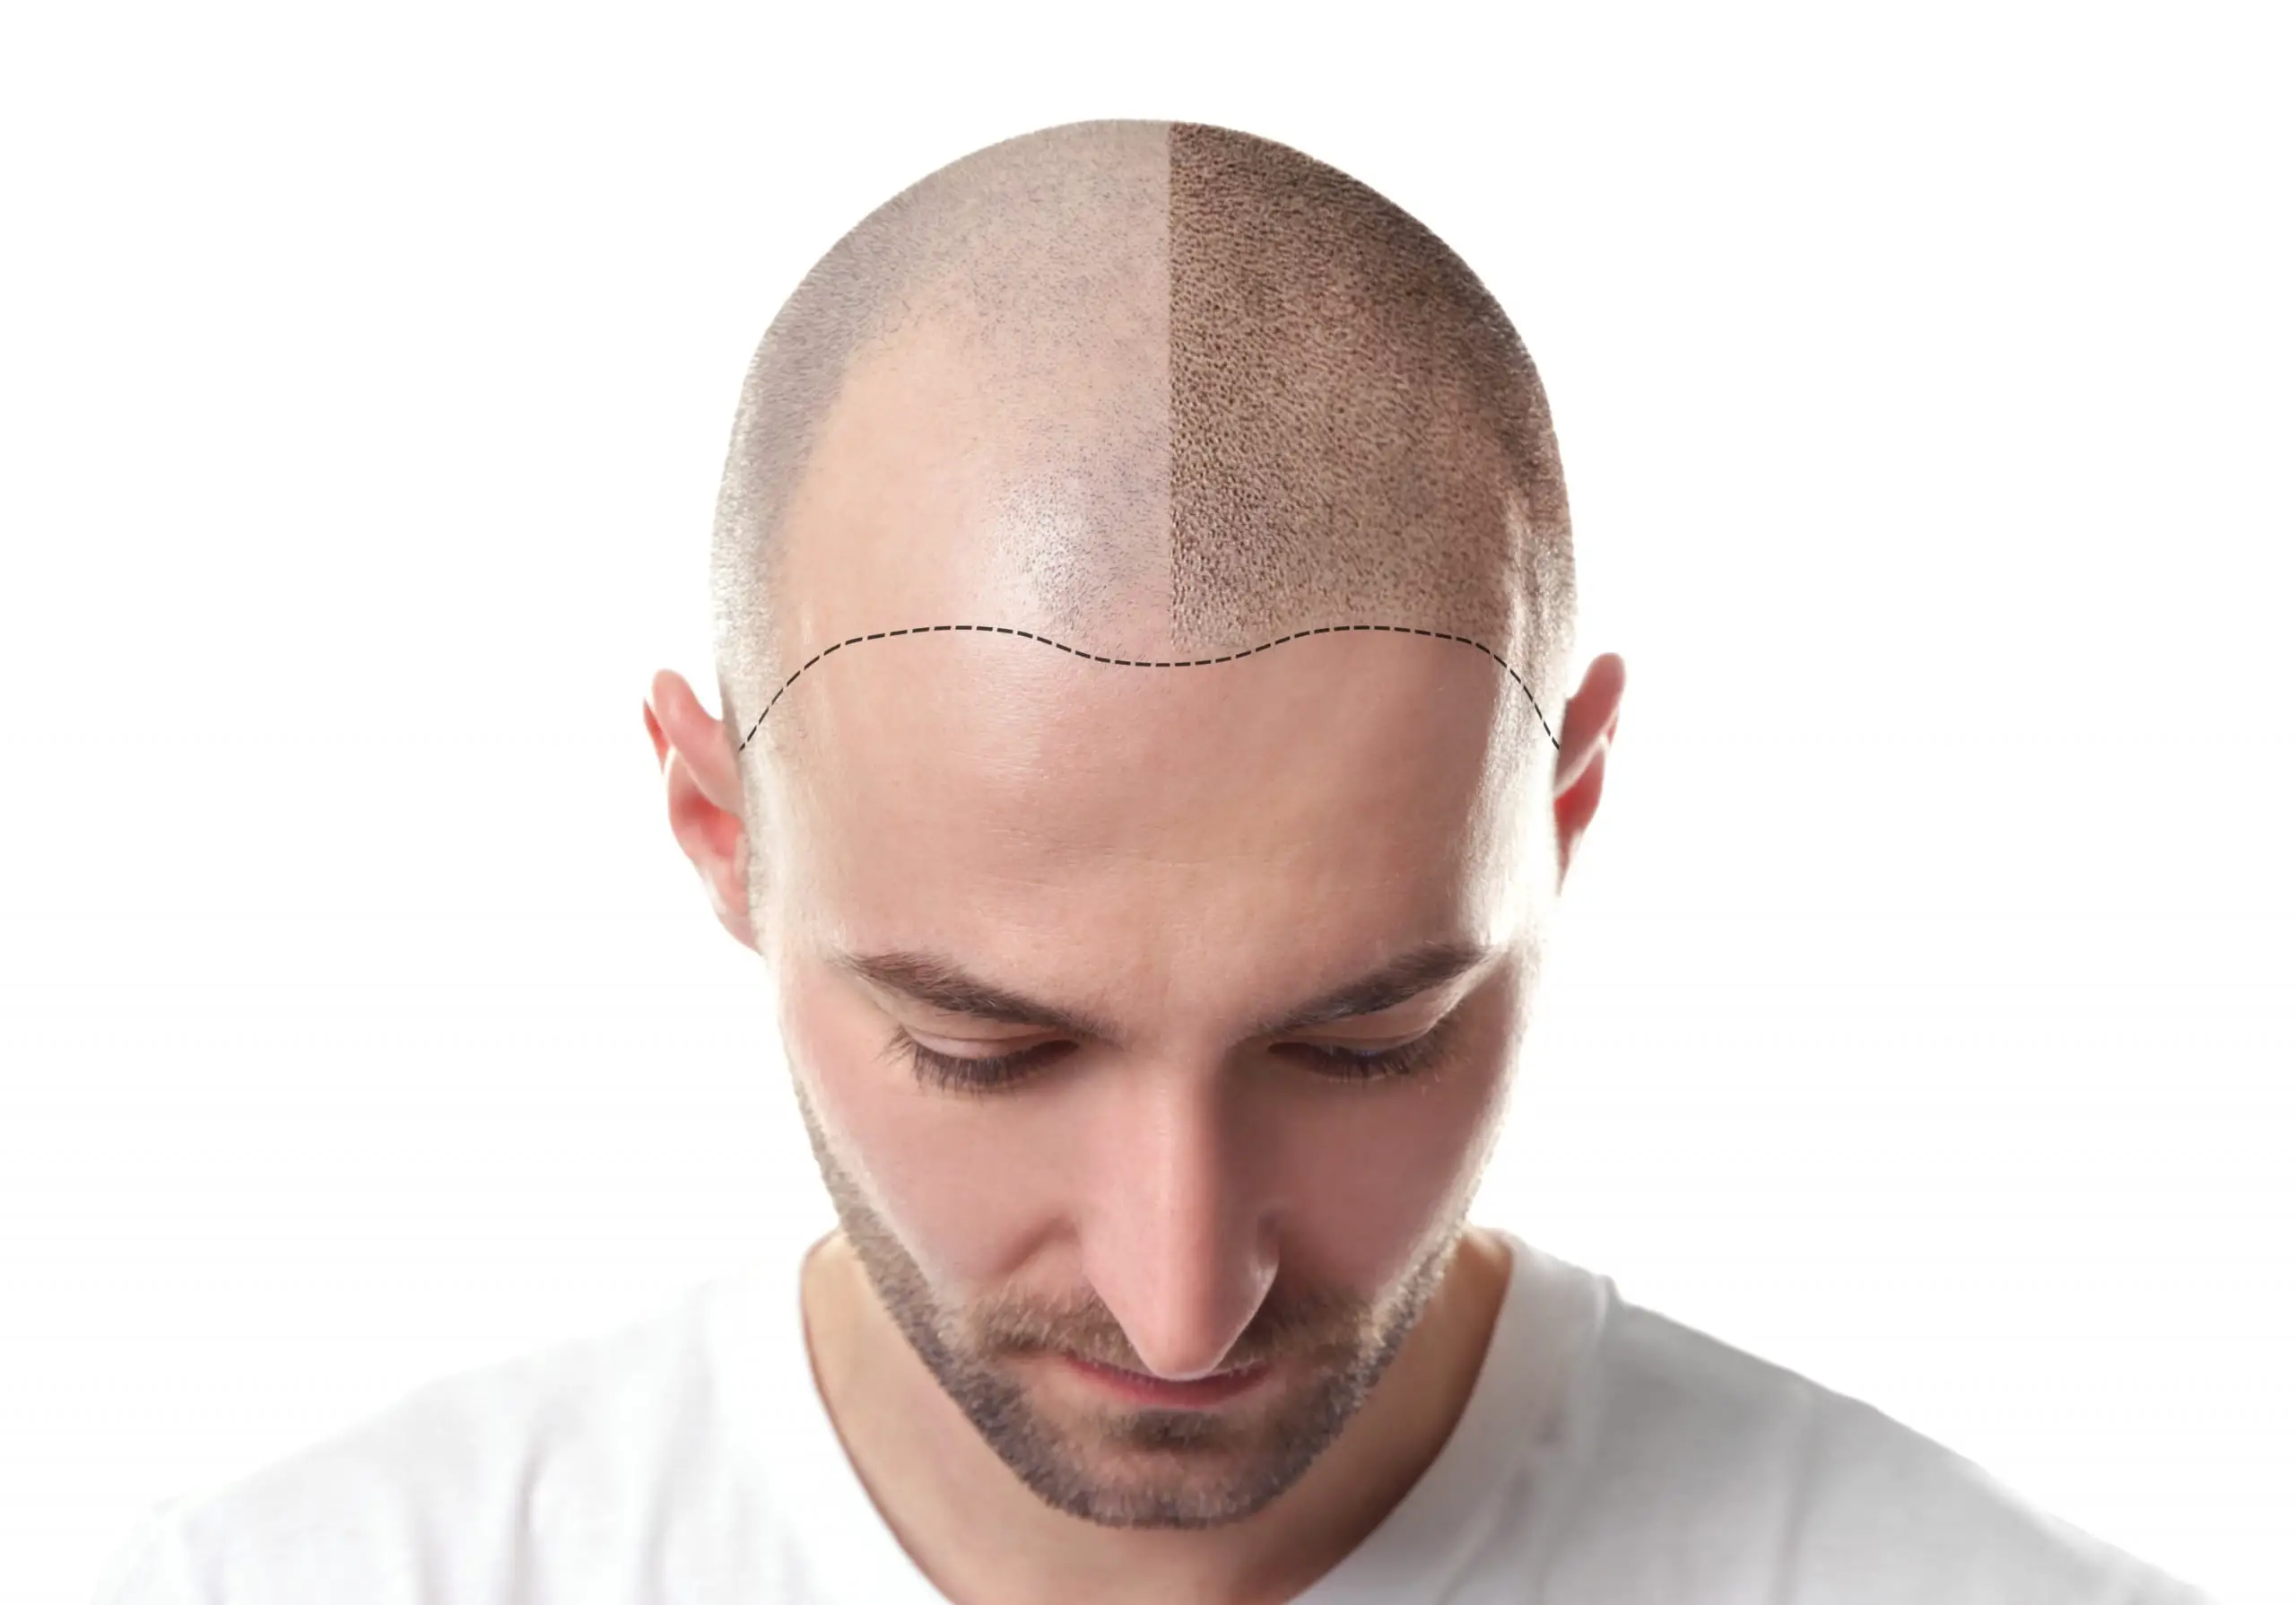 What to Do Before and After a Hair Transplant